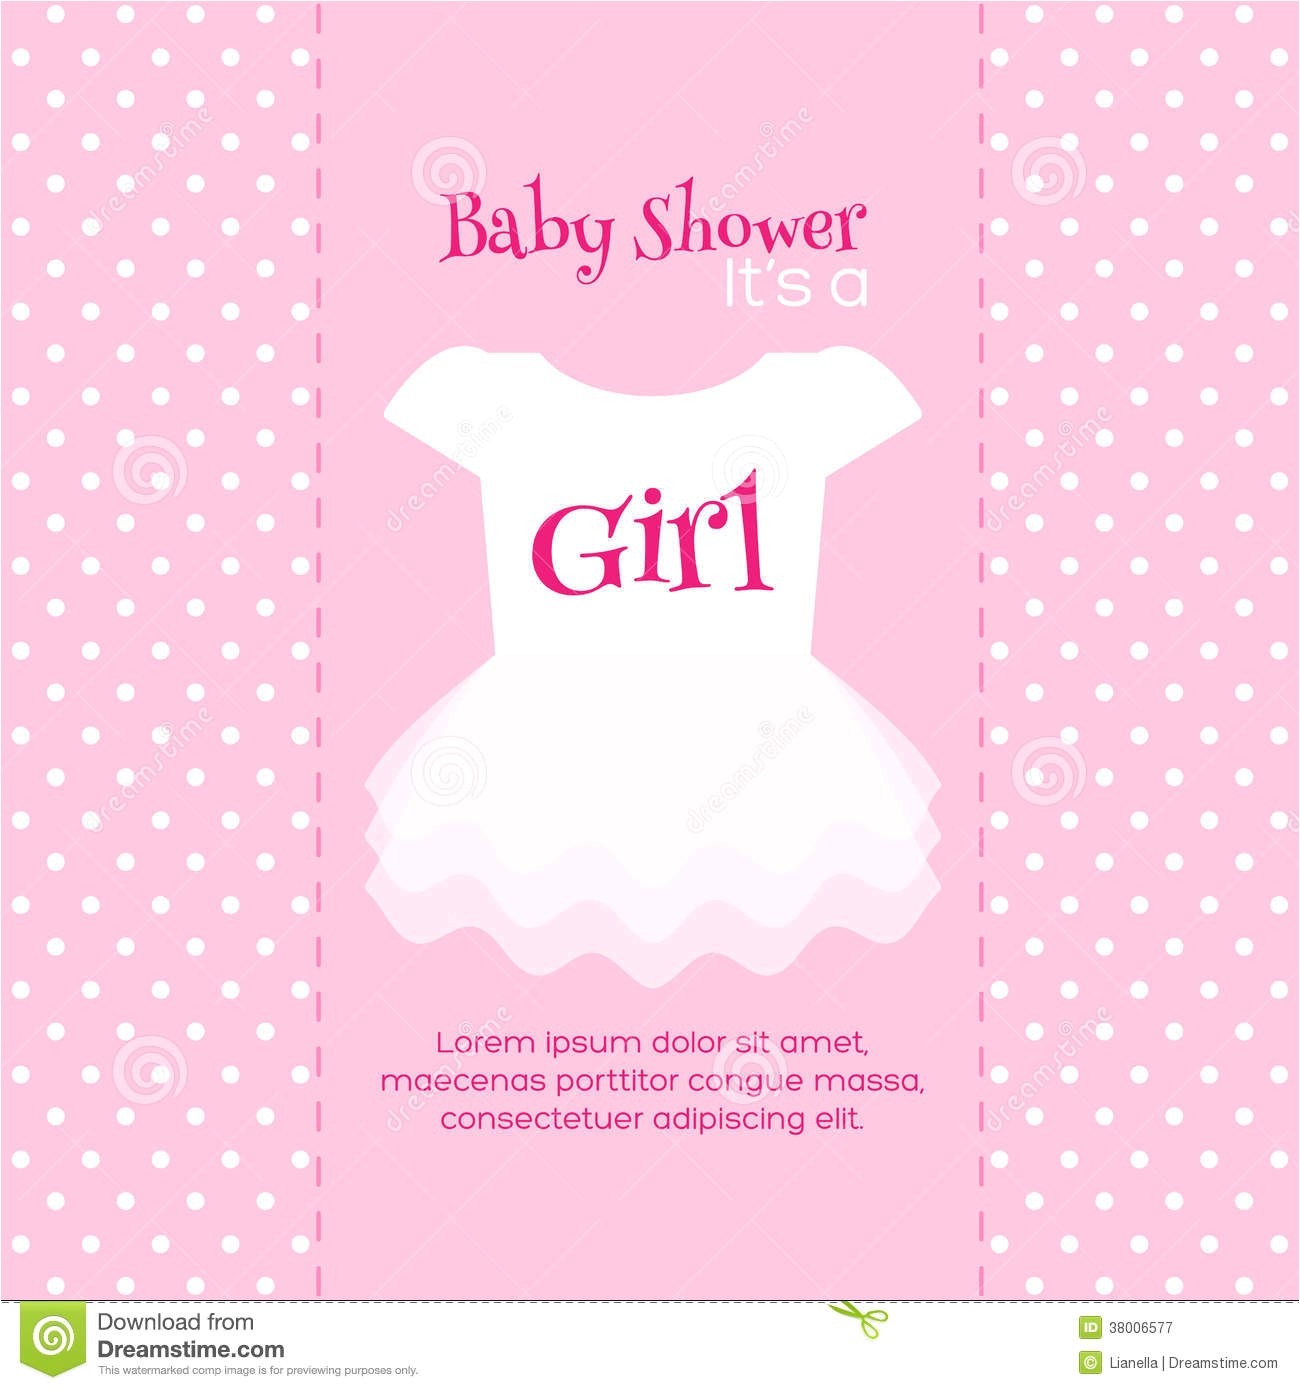 Free Printable Baby Shower Invitations for A Girl Girl Baby Shower Invitations Templates